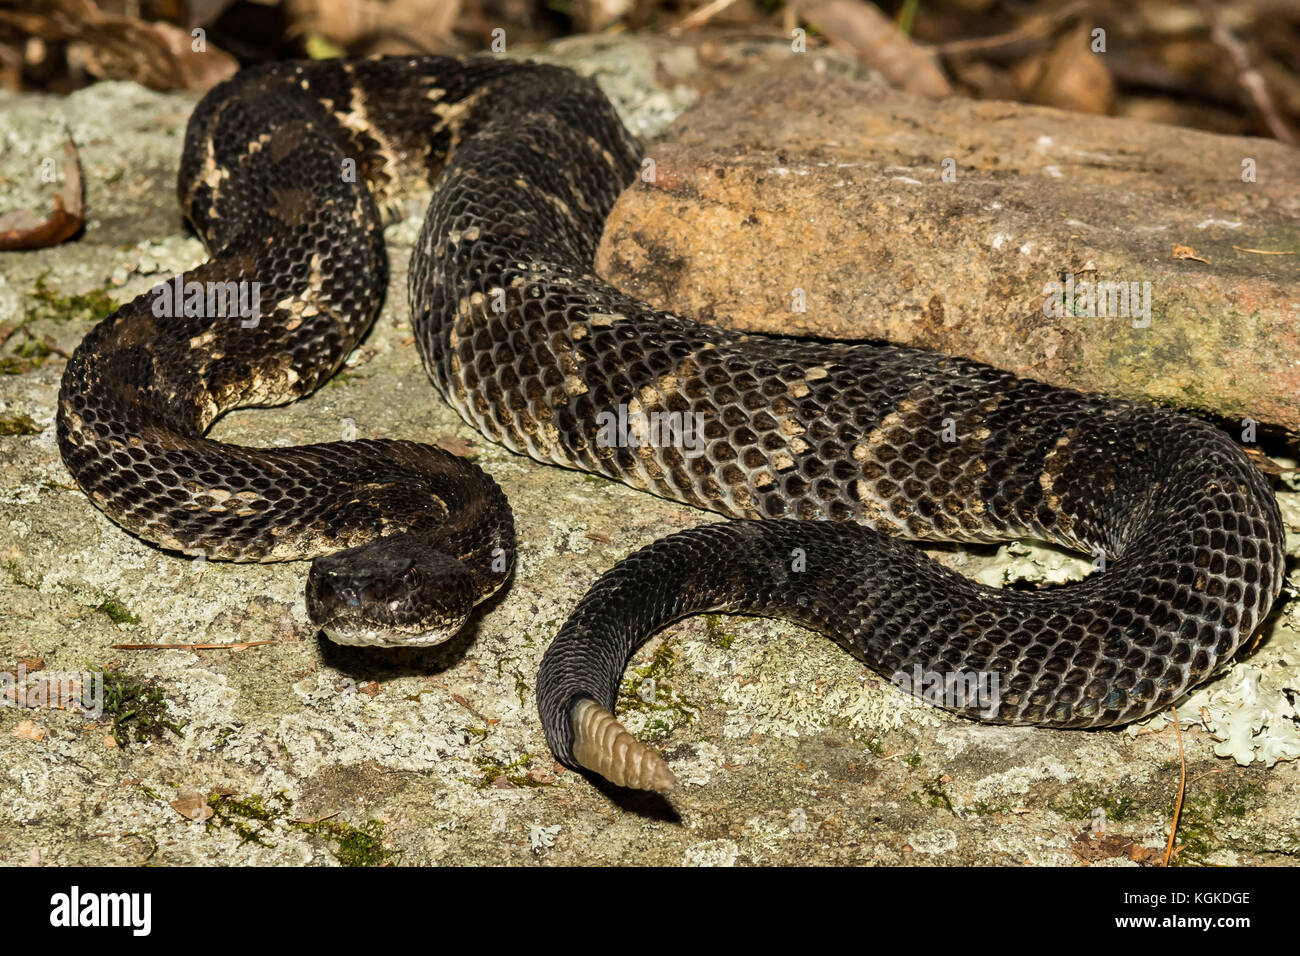 A close up of a black phase Timber Rattlesnake basking on a rock in Pennsylvania Stock Photo